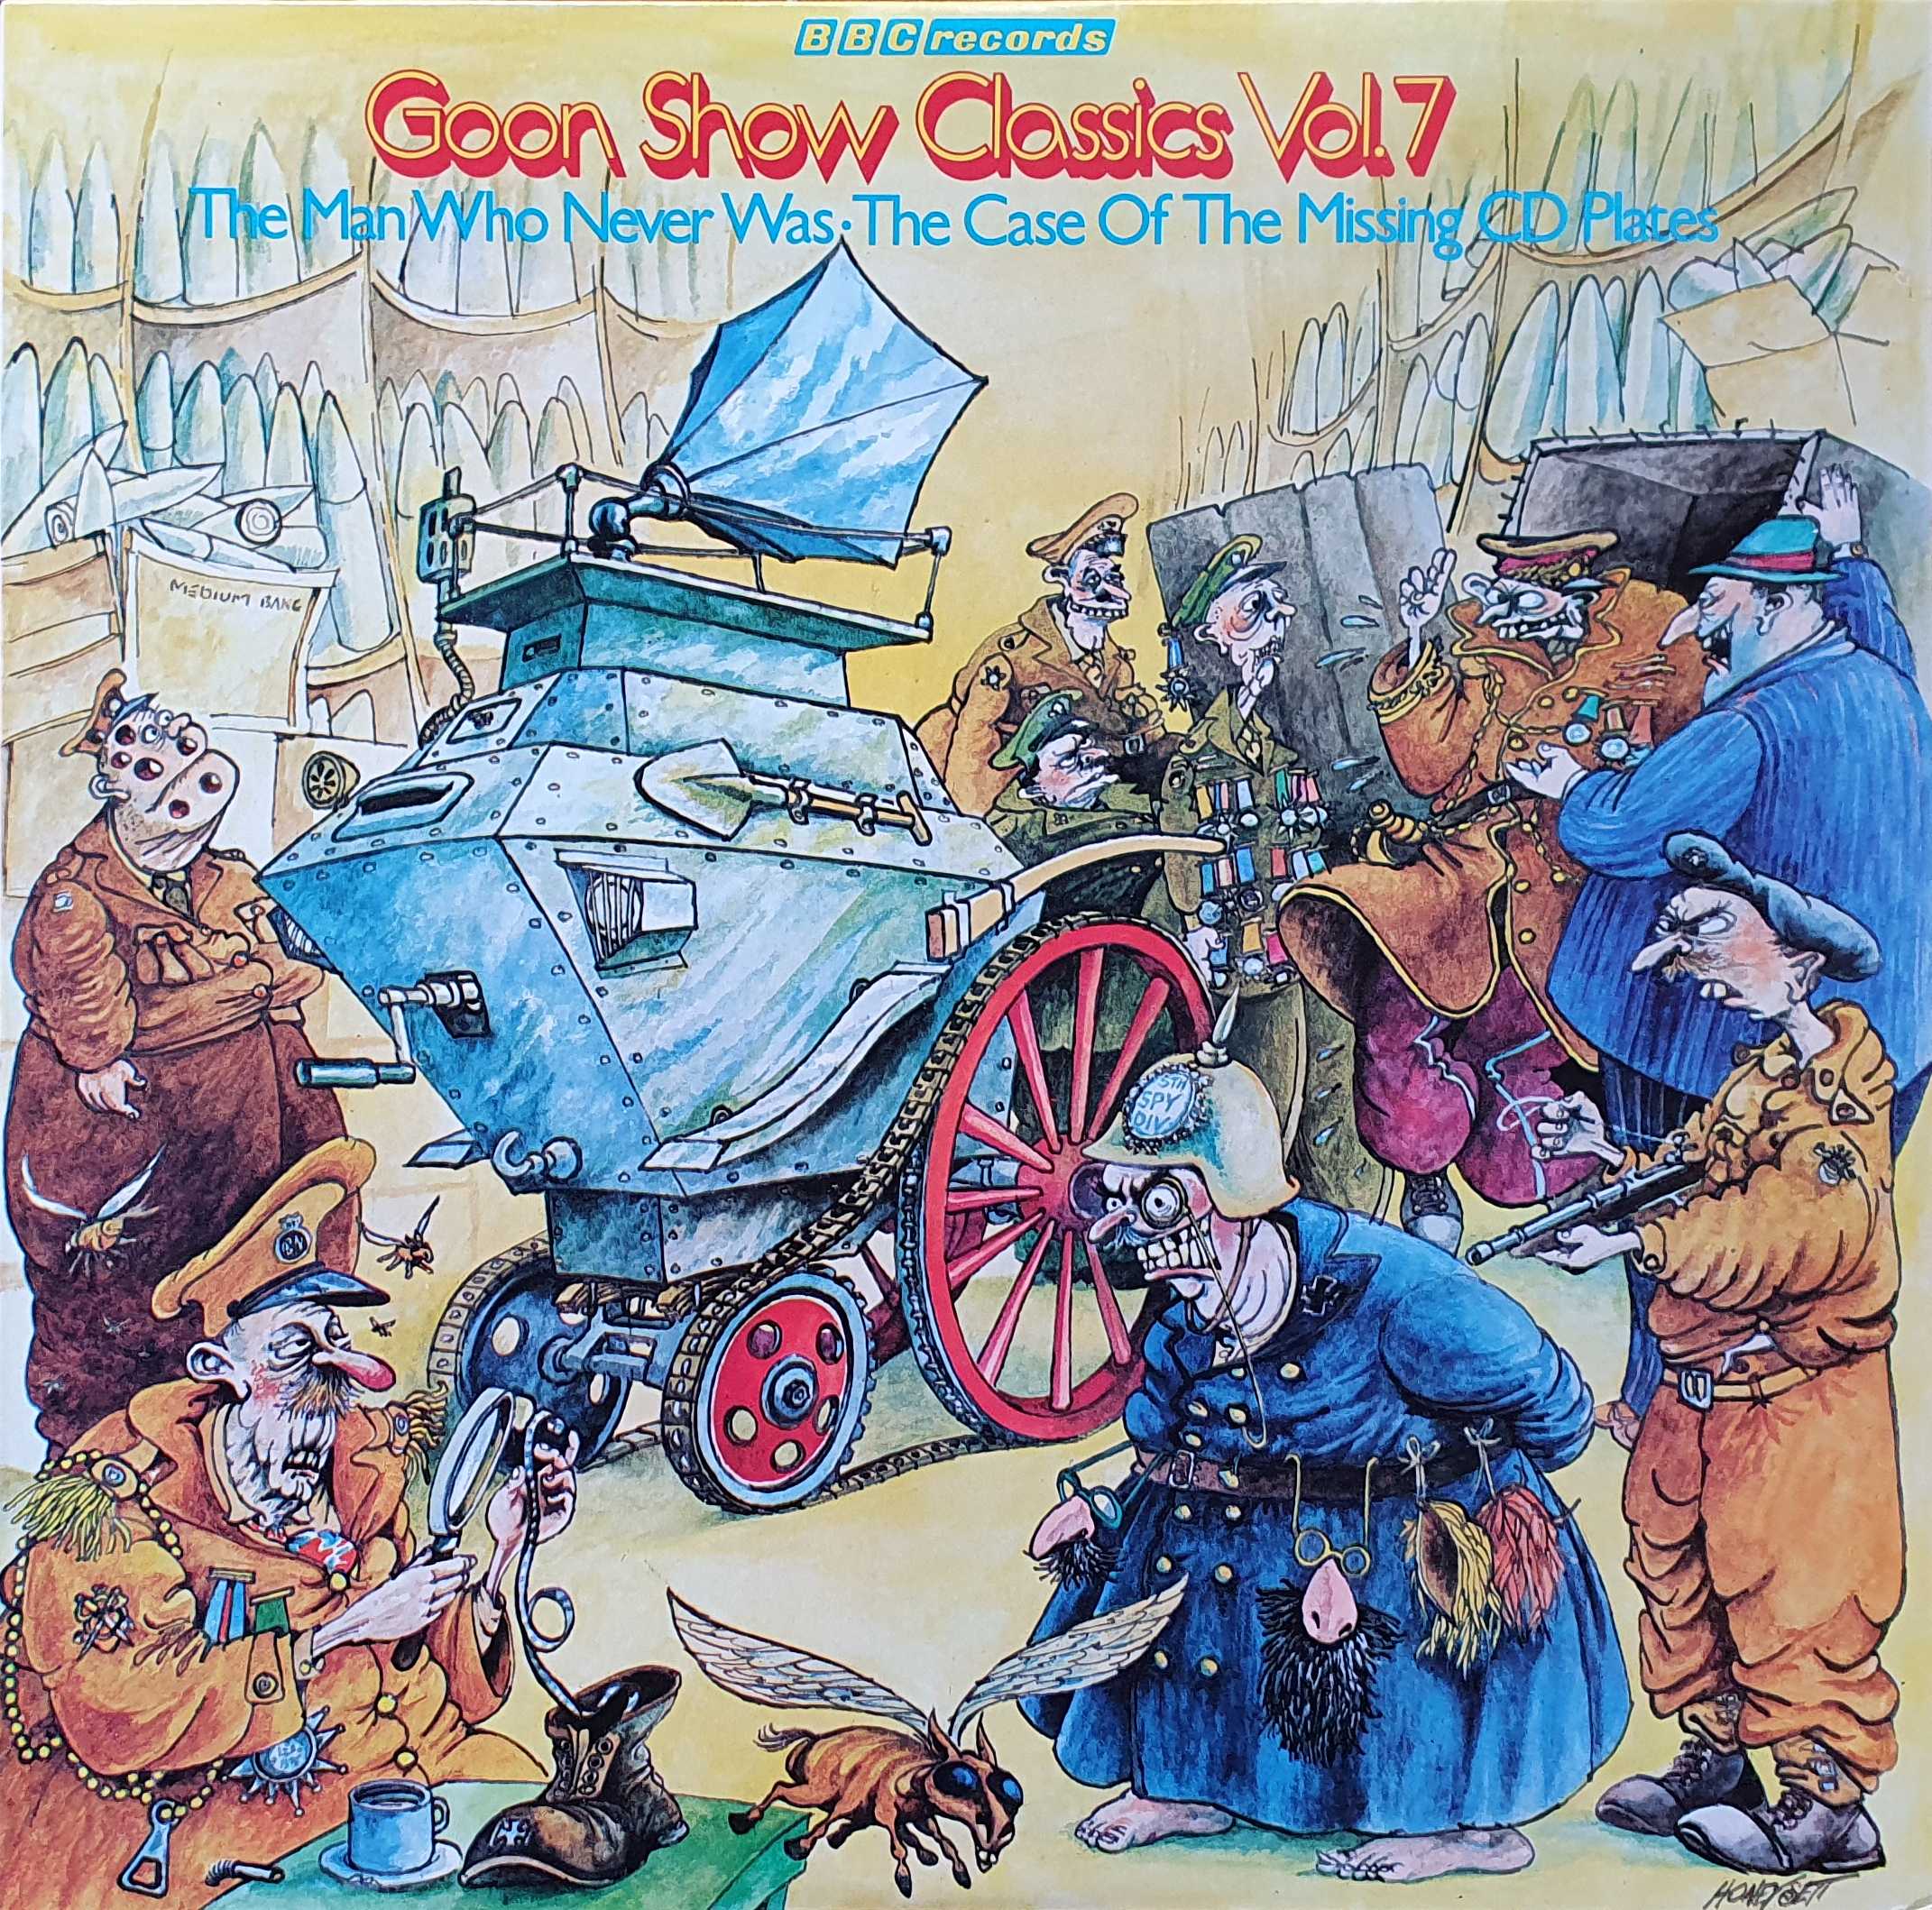 Picture of 2964 058 Goon Show classics vol. 7 by artist The Goon Show from the BBC albums - Records and Tapes library